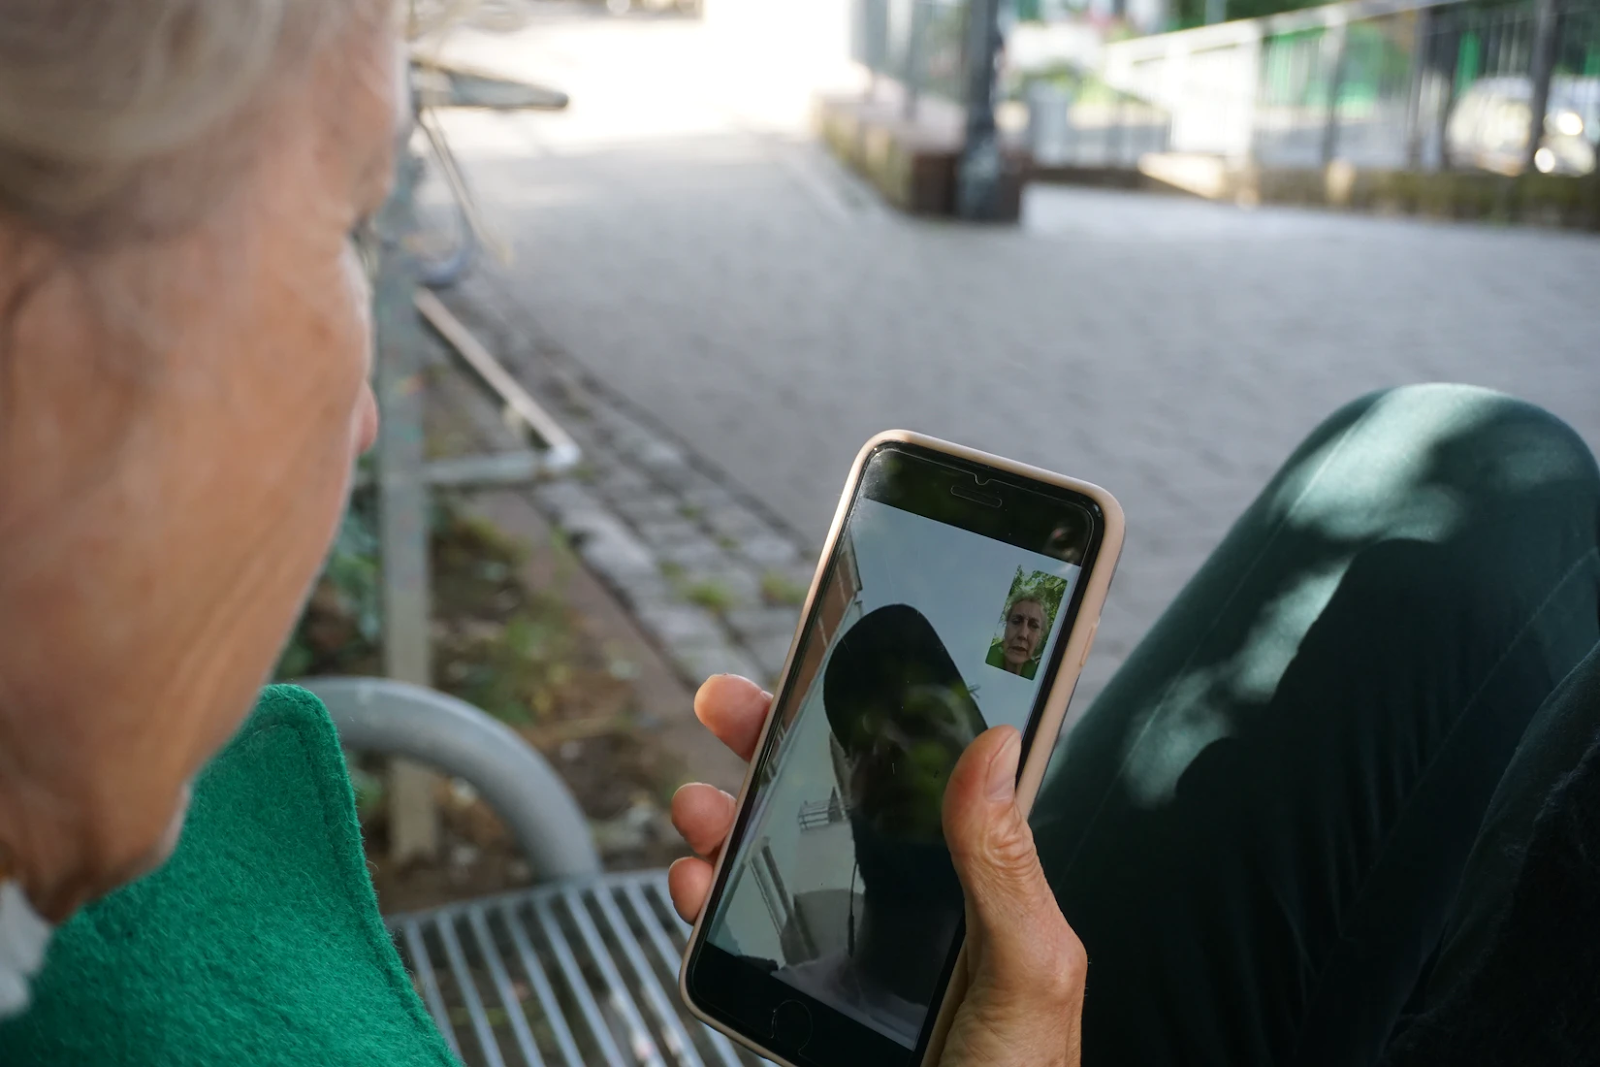 An image of an old woman holding a phone in her hand. She is on a video call with a man in a baseball cap.